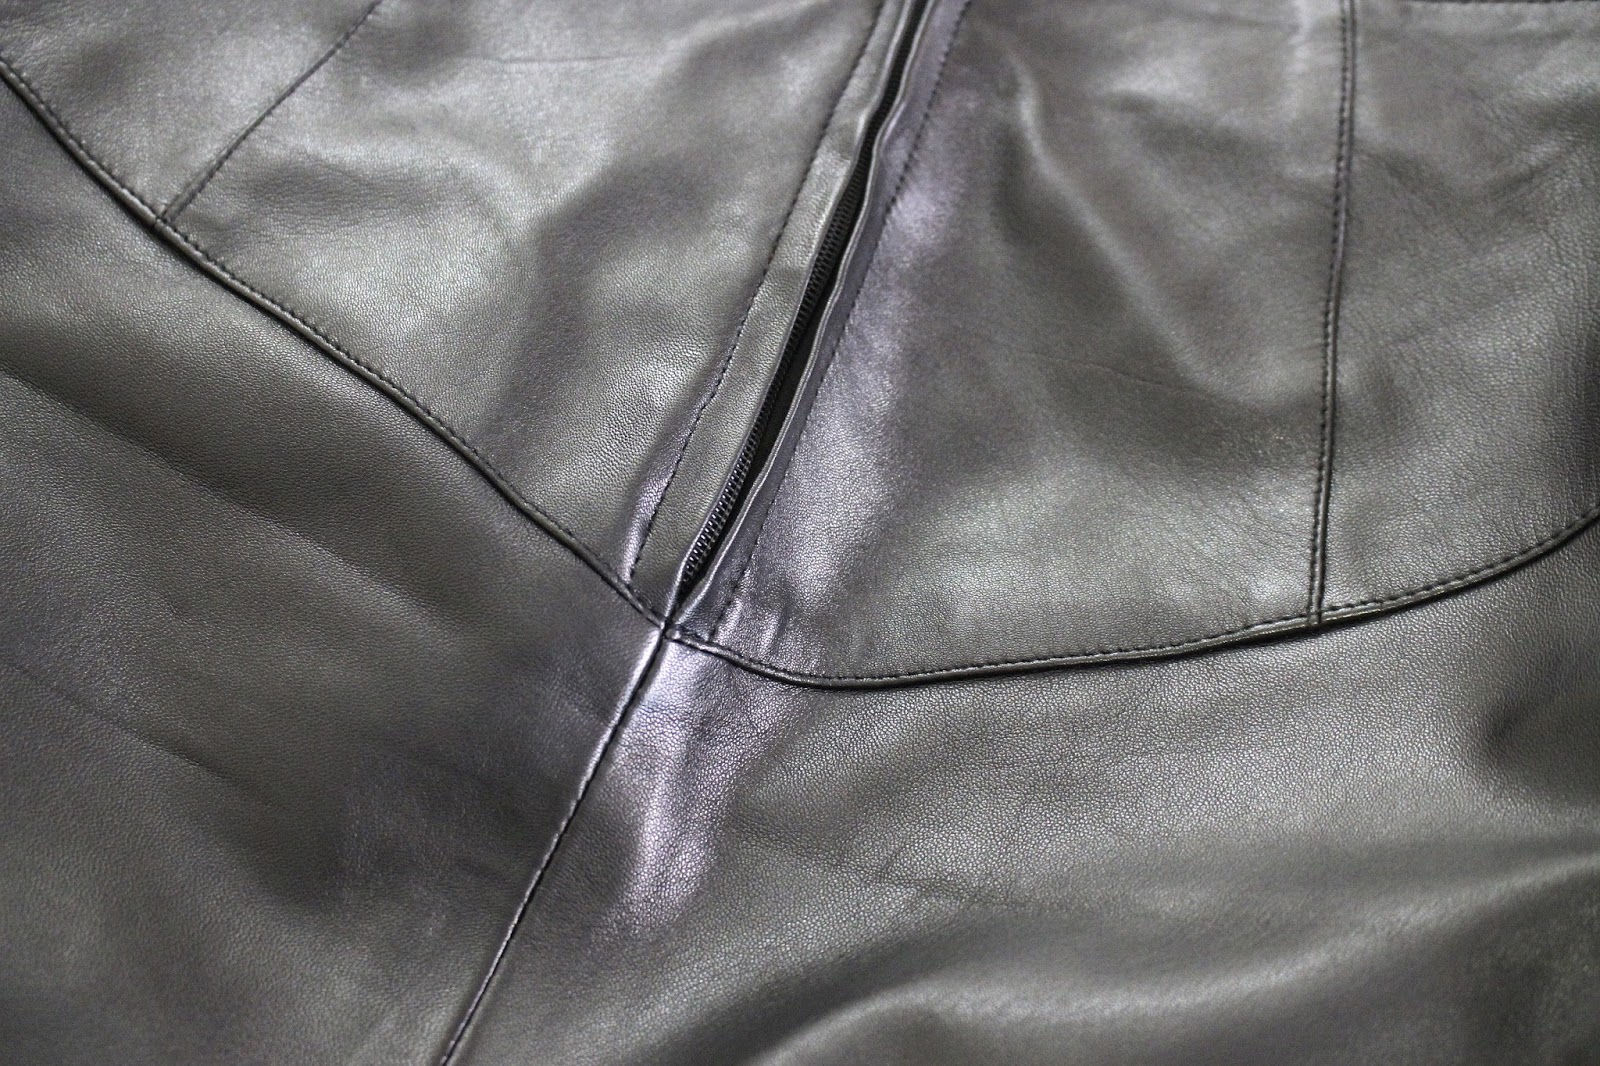 How I Style A Leather Skirt- Leatherotics Review - fantail flo